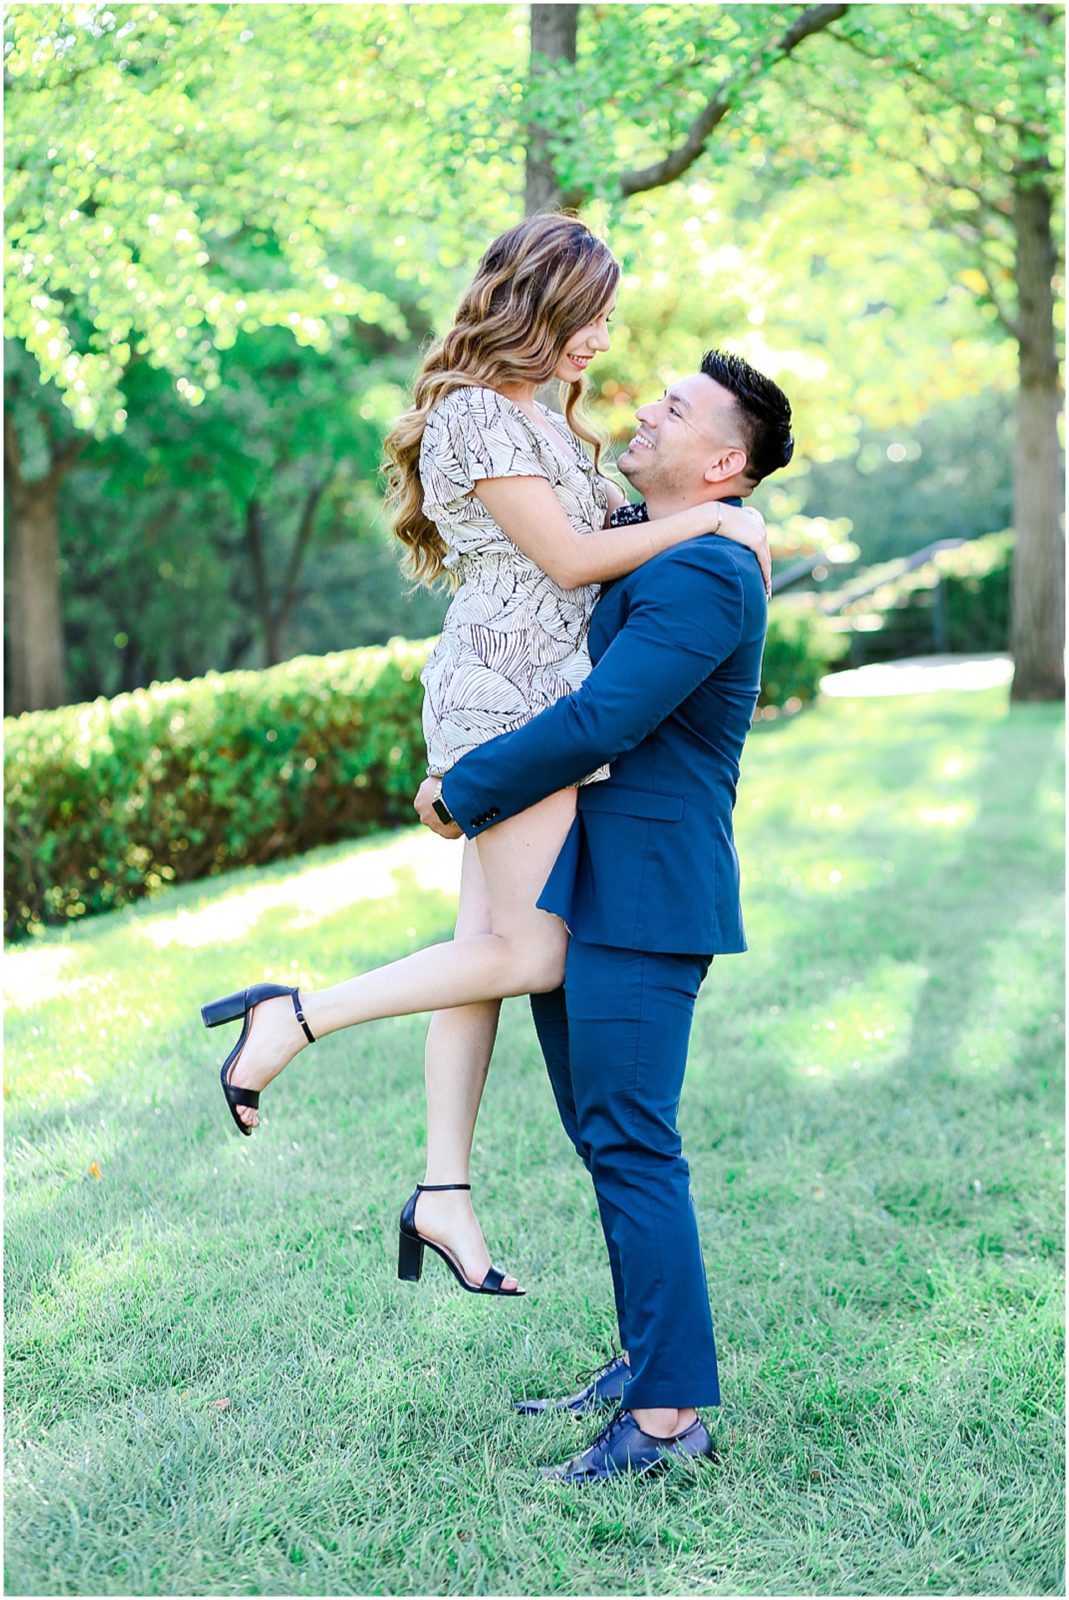 how to pose a couple for their engagement photos and wedding photos